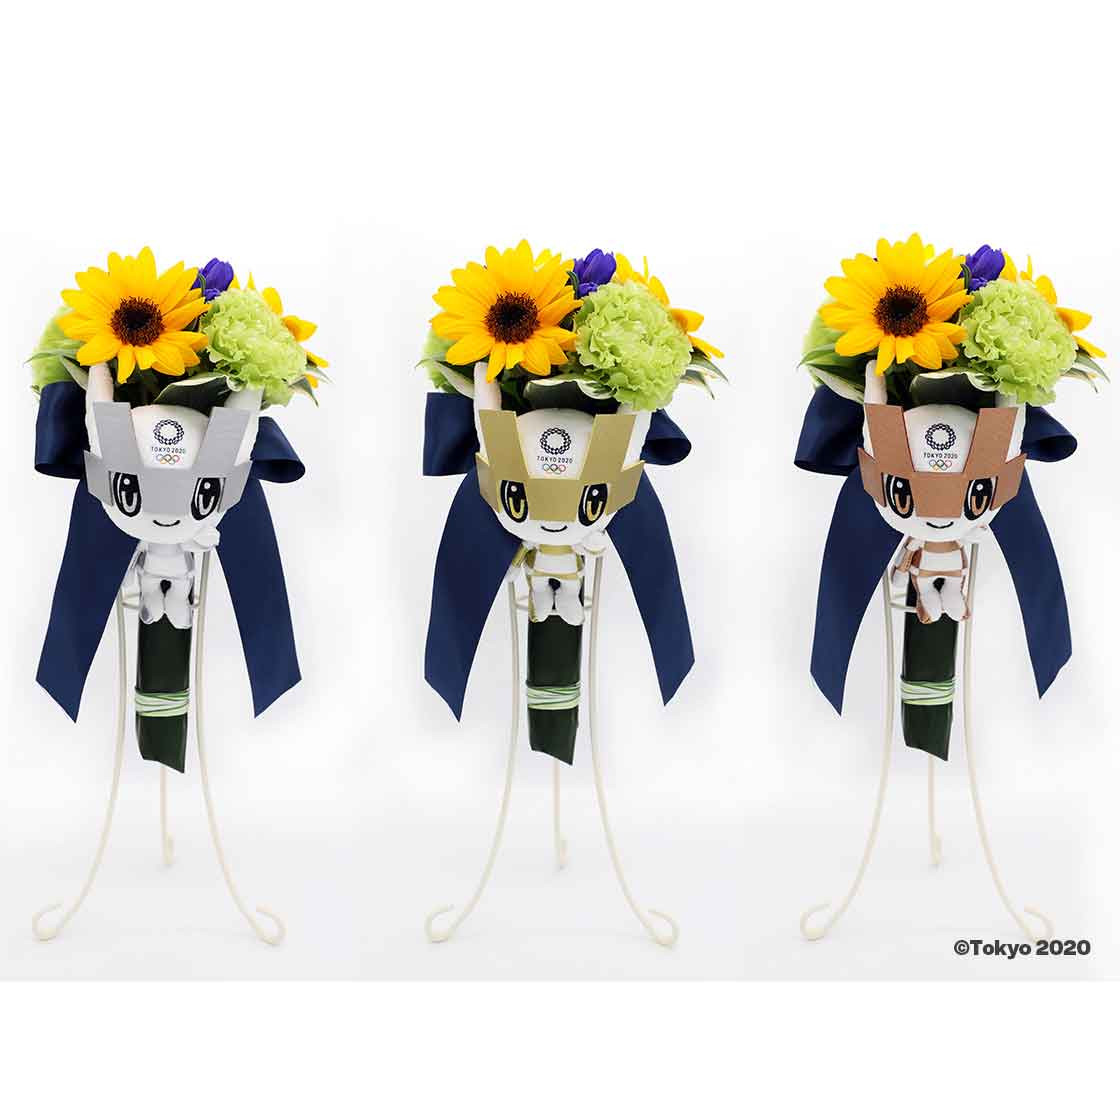 Olympic bouquets carry deep meaning for northeast Japan